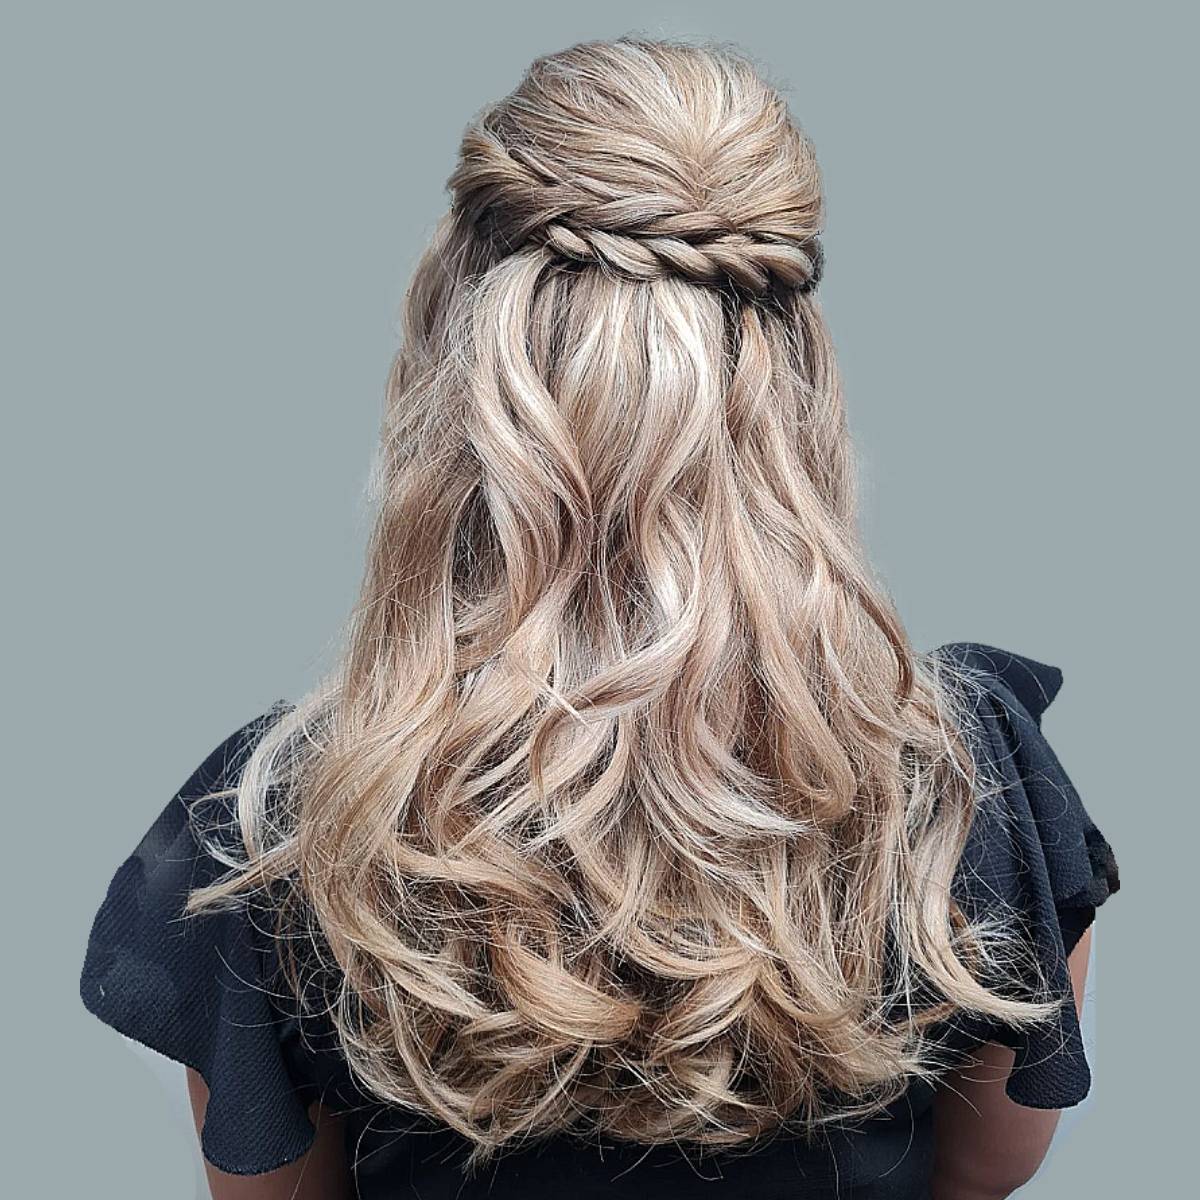 40 Creative And Cute Girls Hairstyles - Love Hairstyles